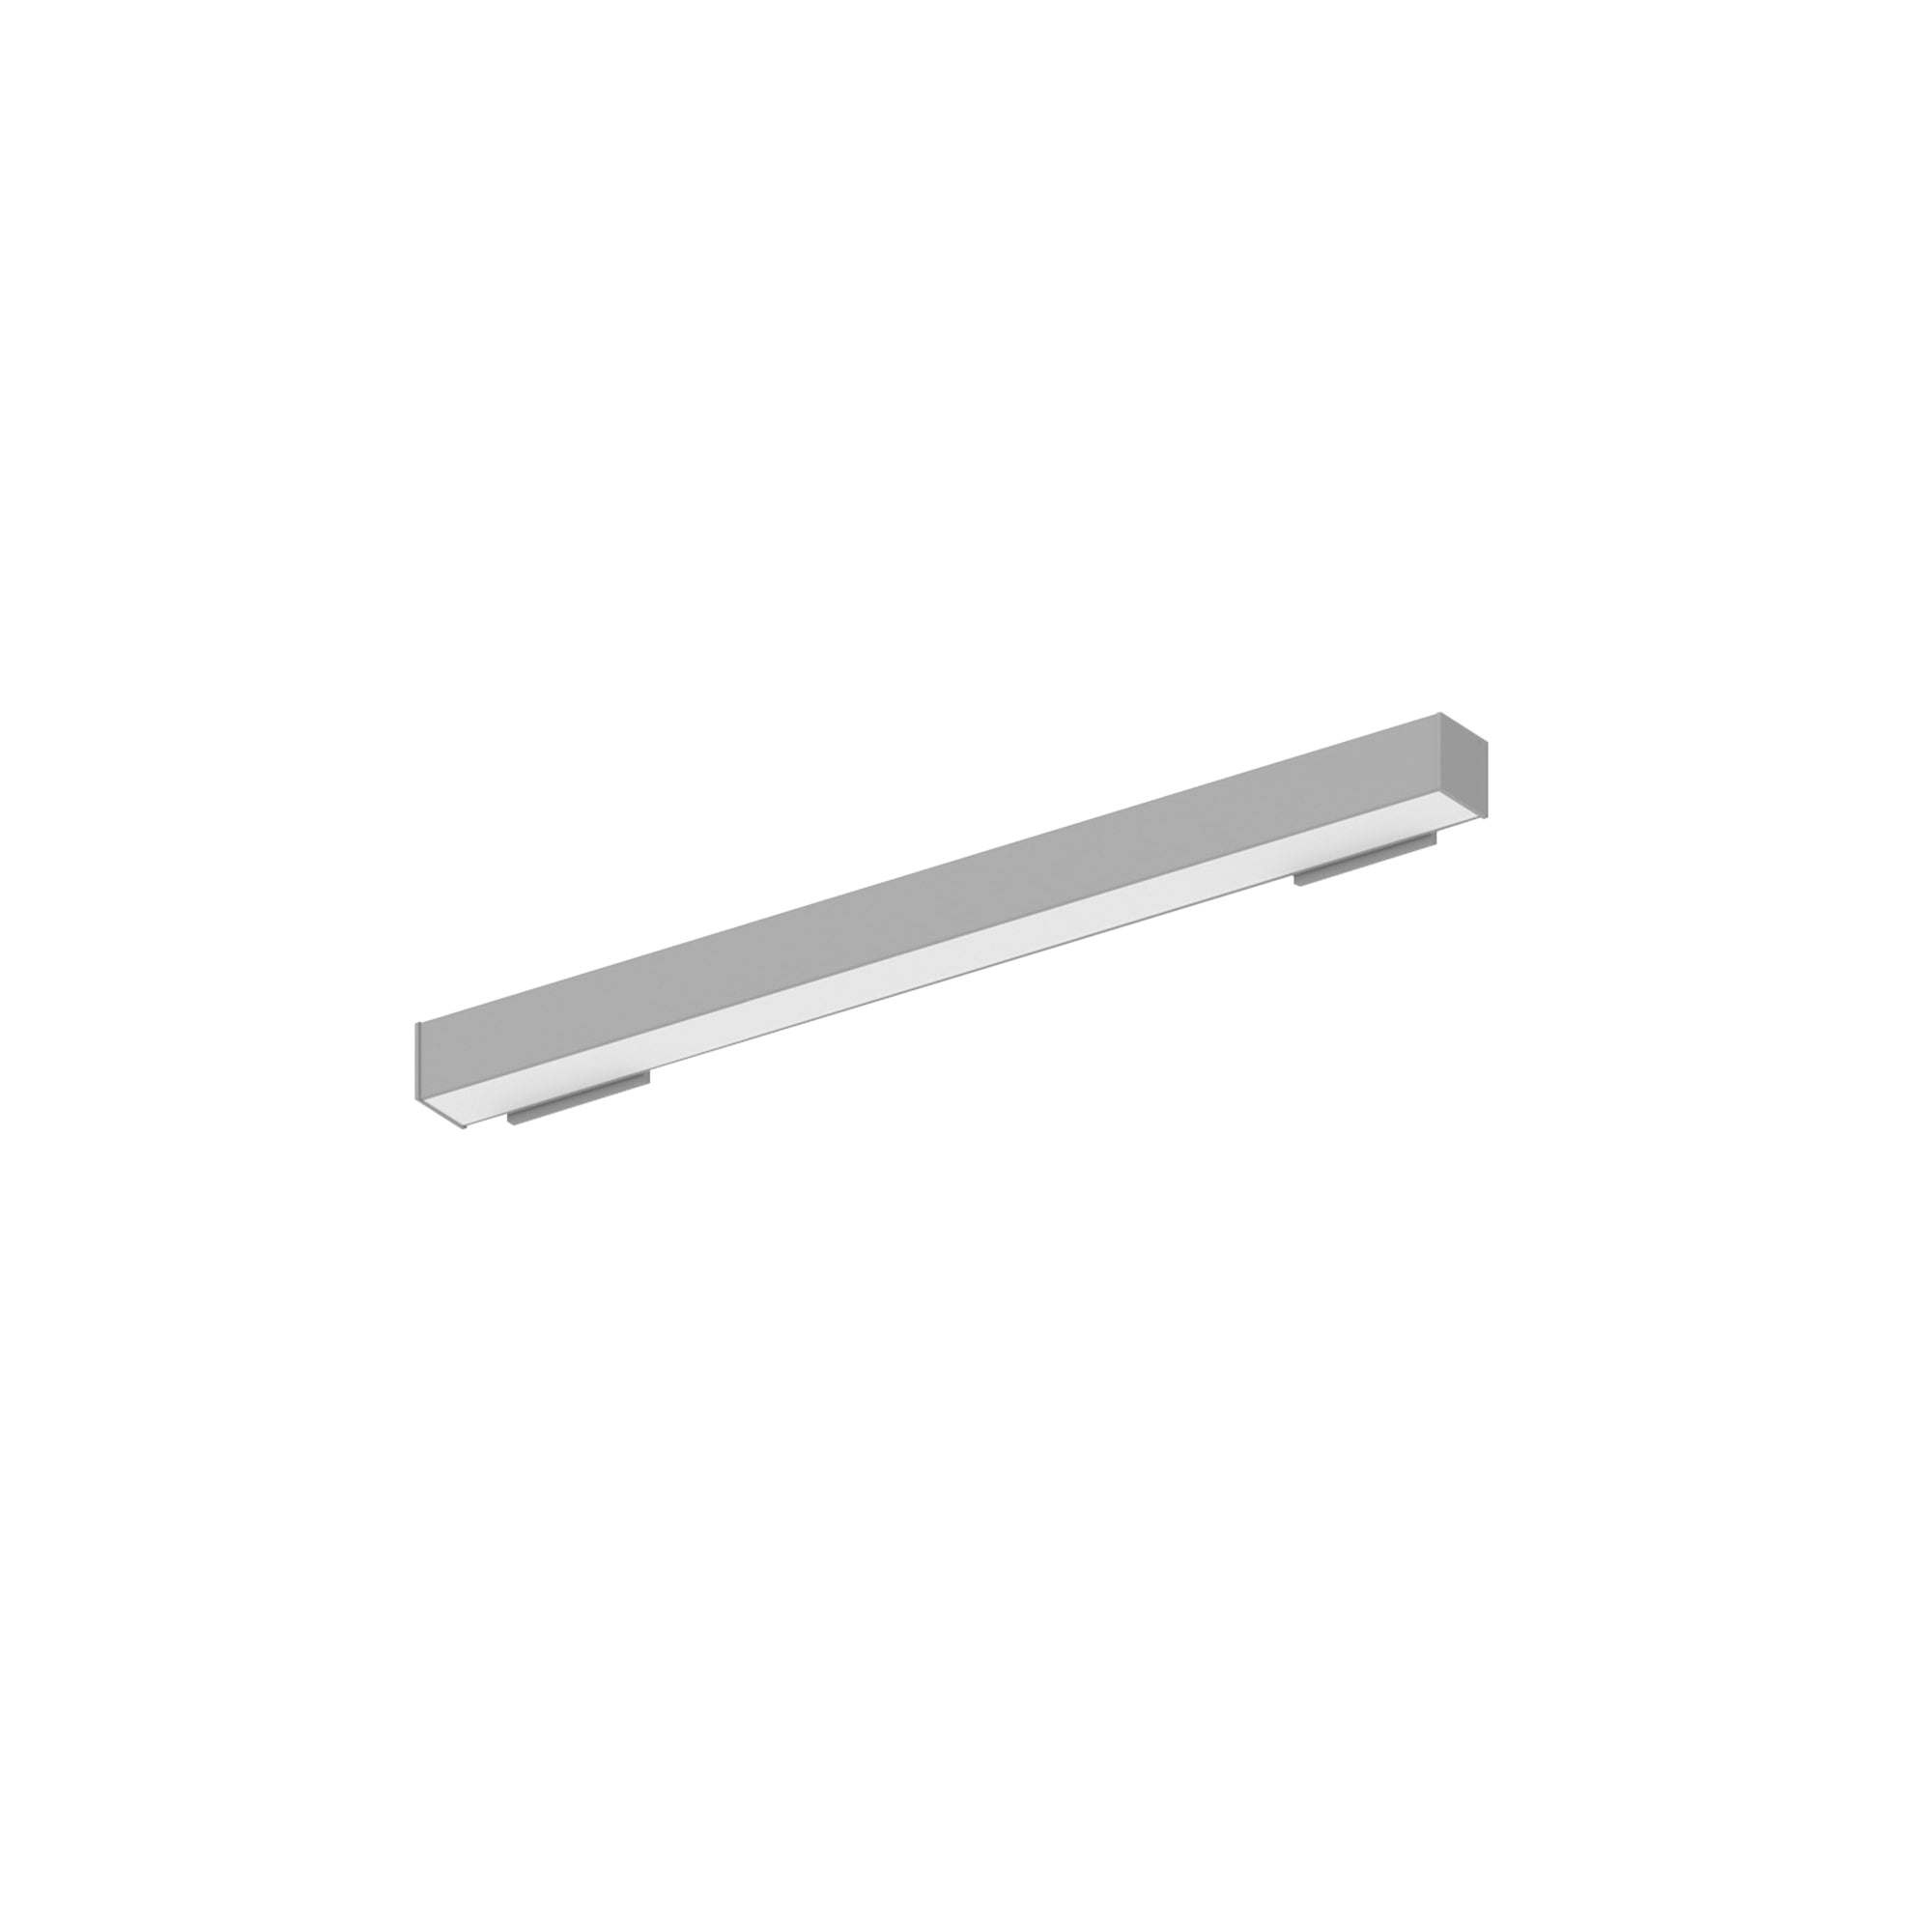 Nora Lighting NWLIN-21030A/L2-R2 - Linear - 2' L-Line LED Wall Mount Linear, 2100lm / 3000K, 2 Inchx4 Inch Left Plate & 2 Inchx4 Inch Right Plate, Aluminum Finish